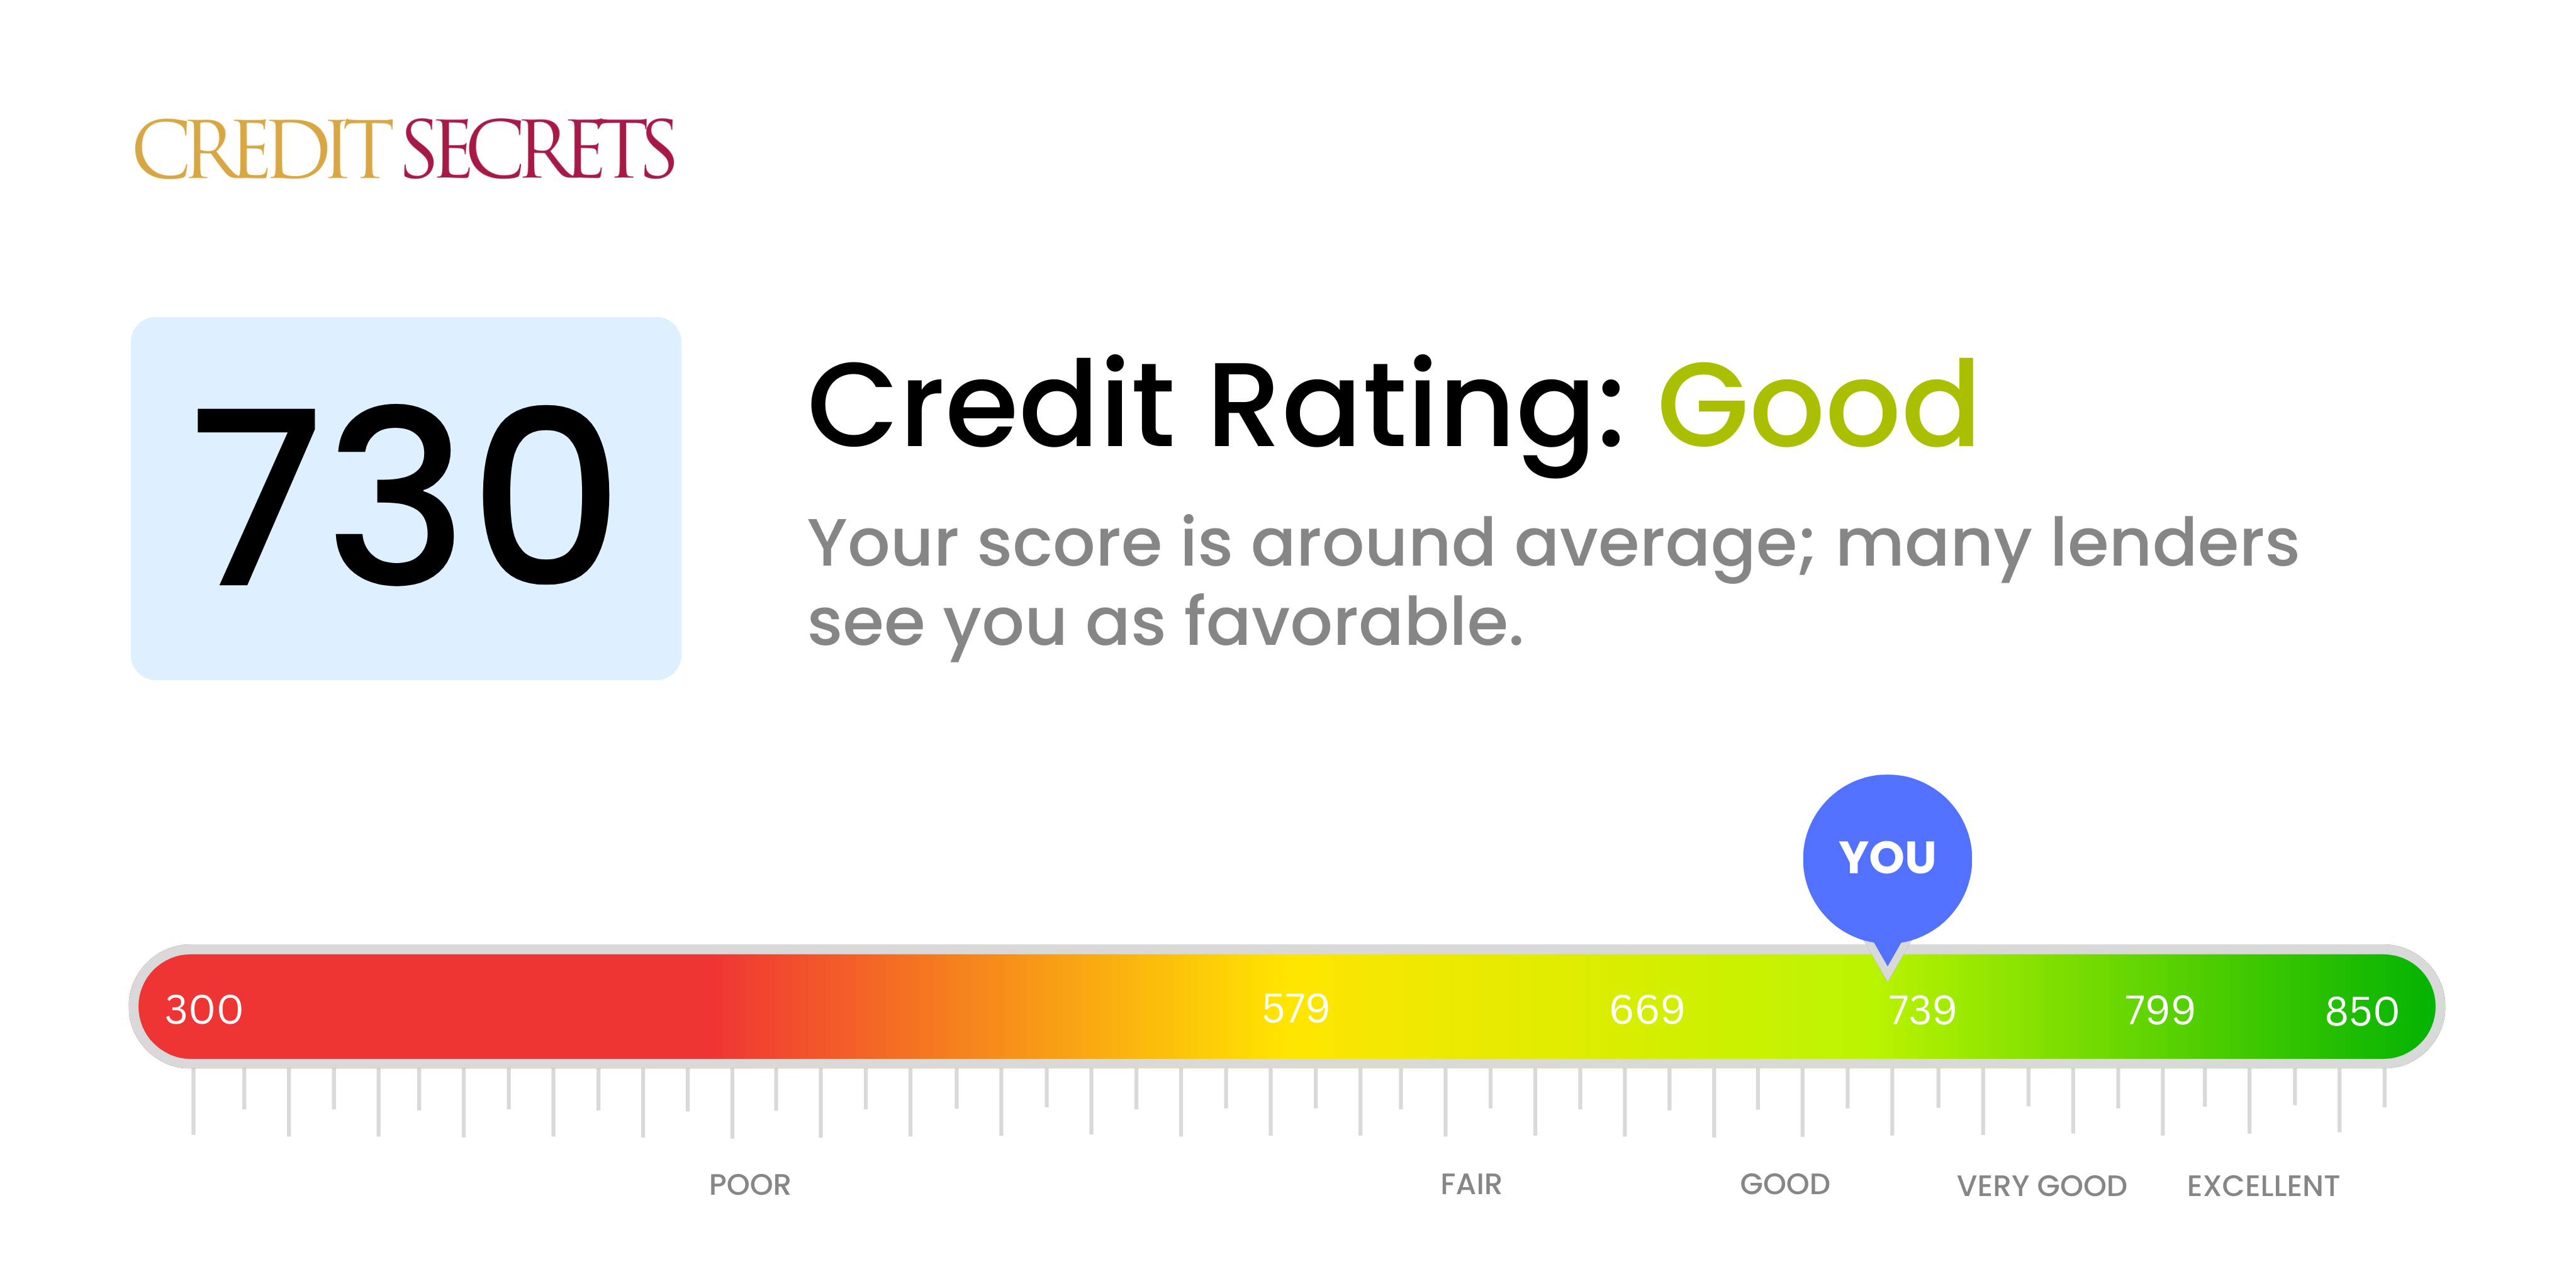 Is 730 a good credit score?